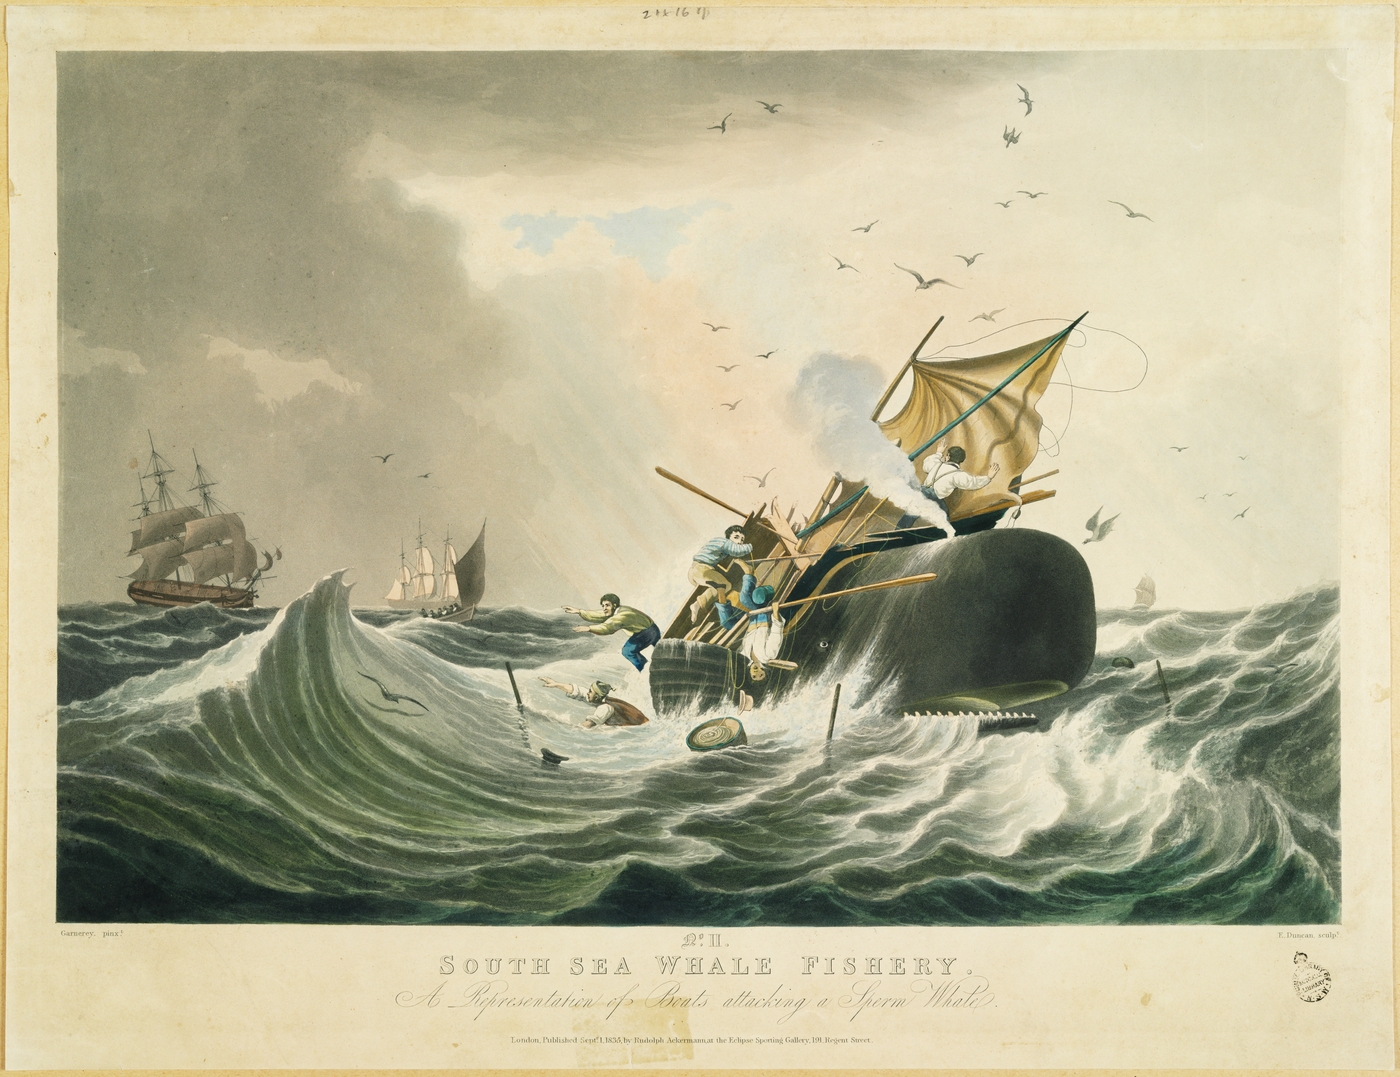 Painting of boats attacking a sperm whale.